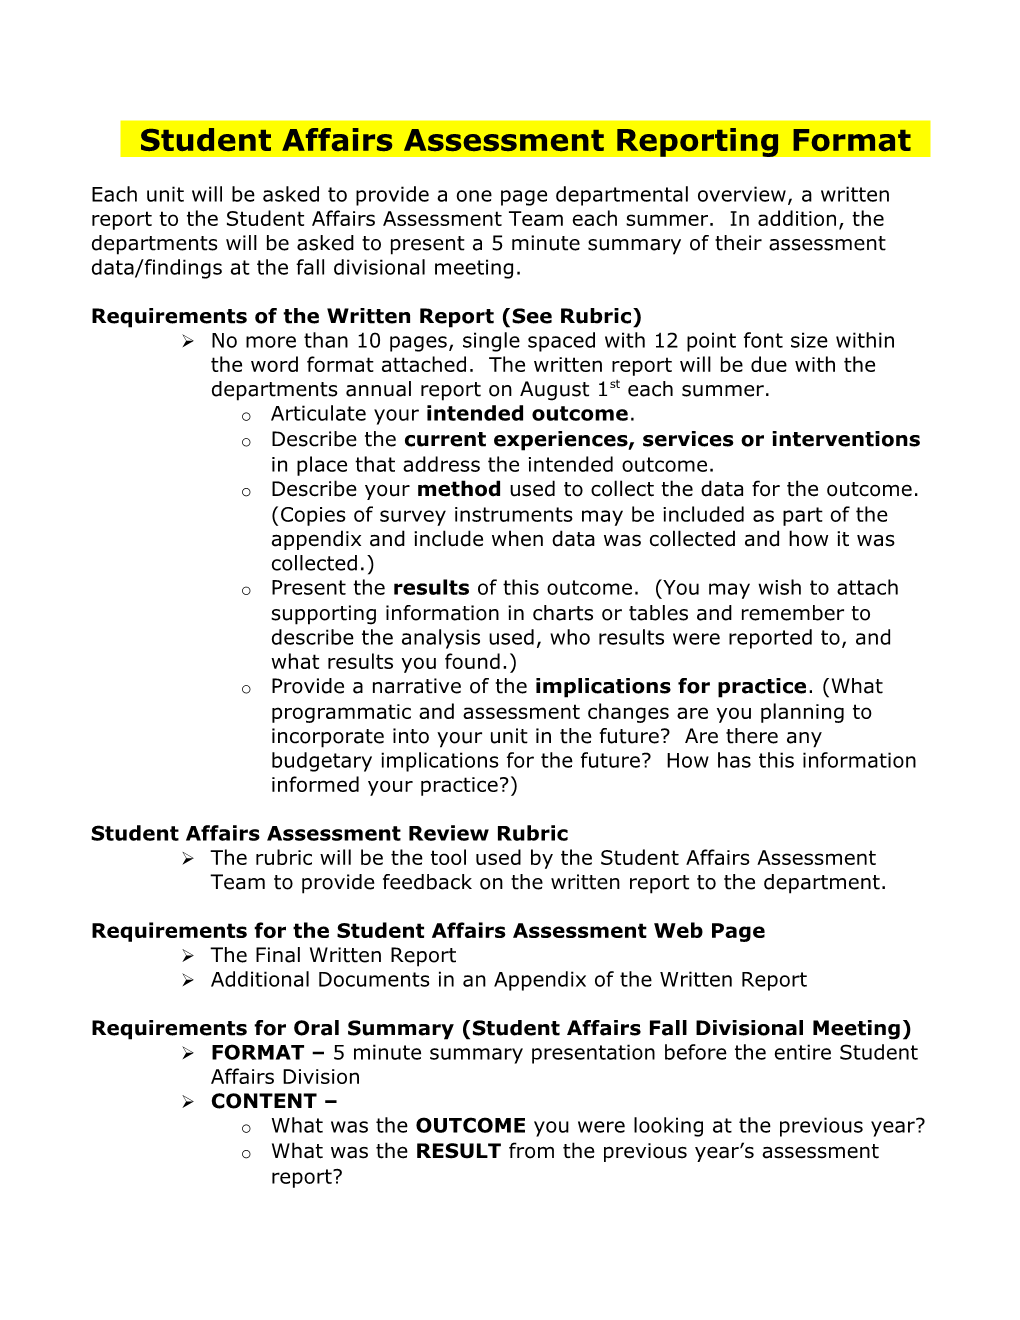 Student Affairs Assessment Reporting Format